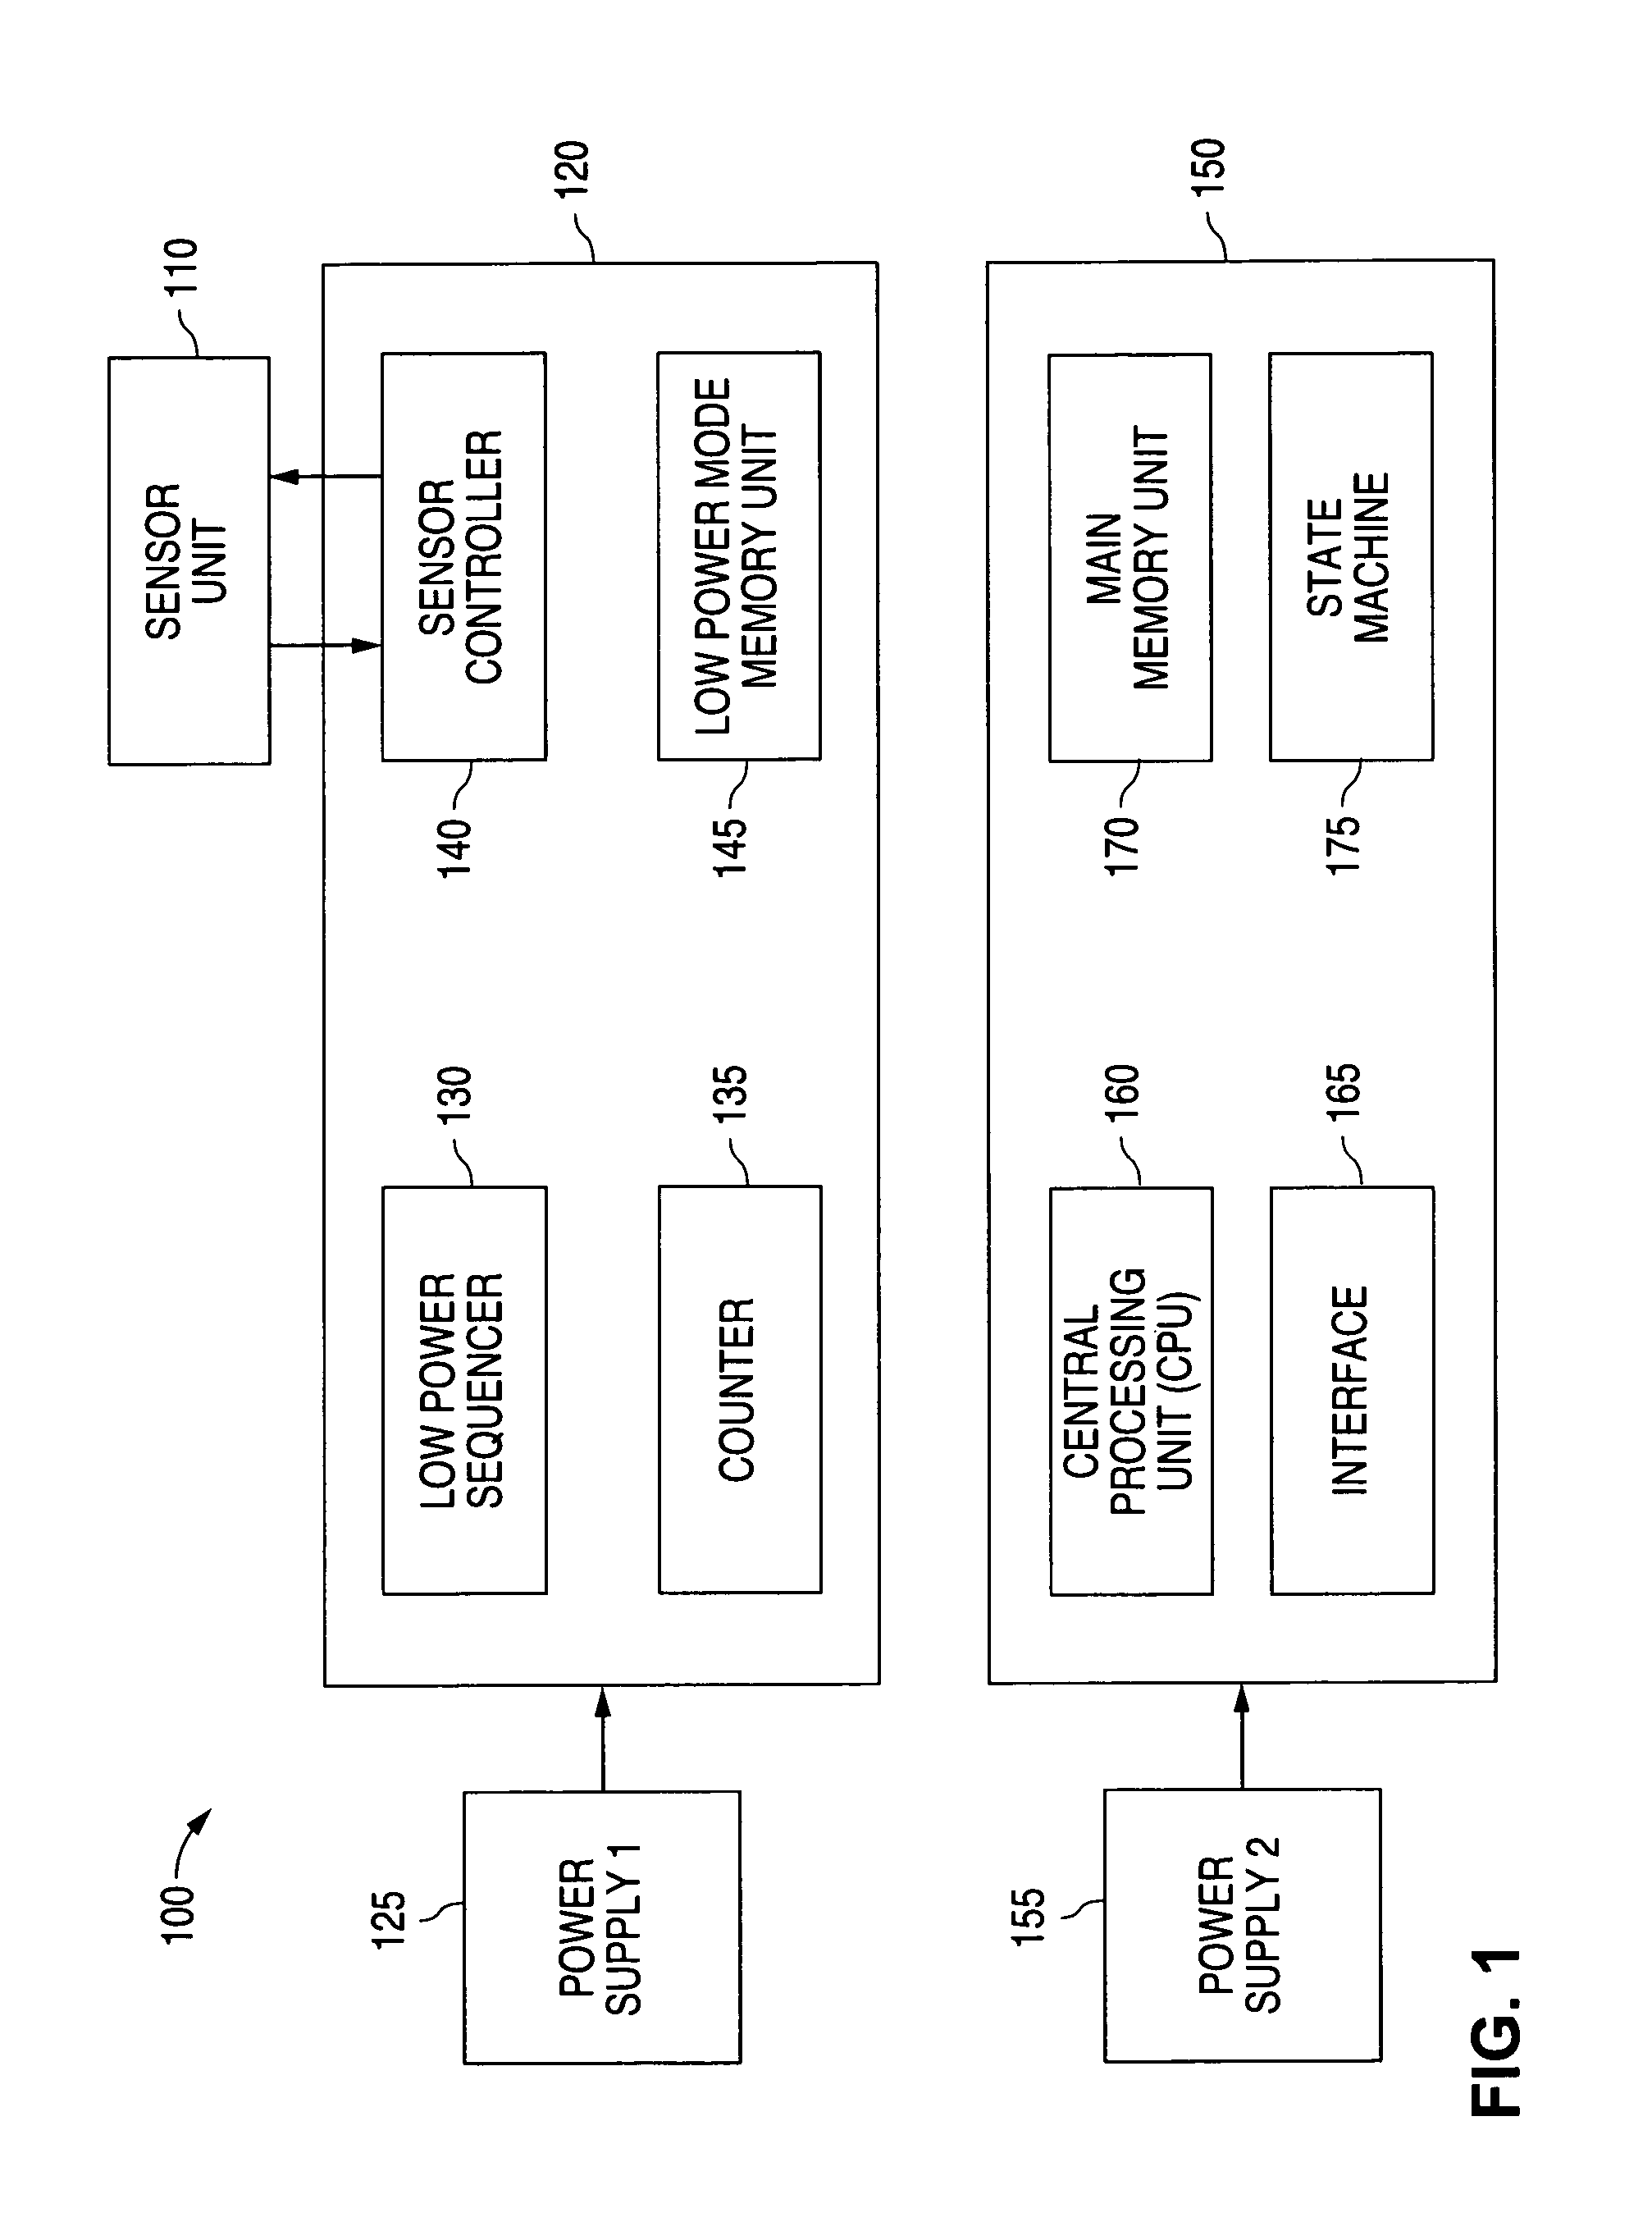 System and method for minimizing power consumption for an object sensor